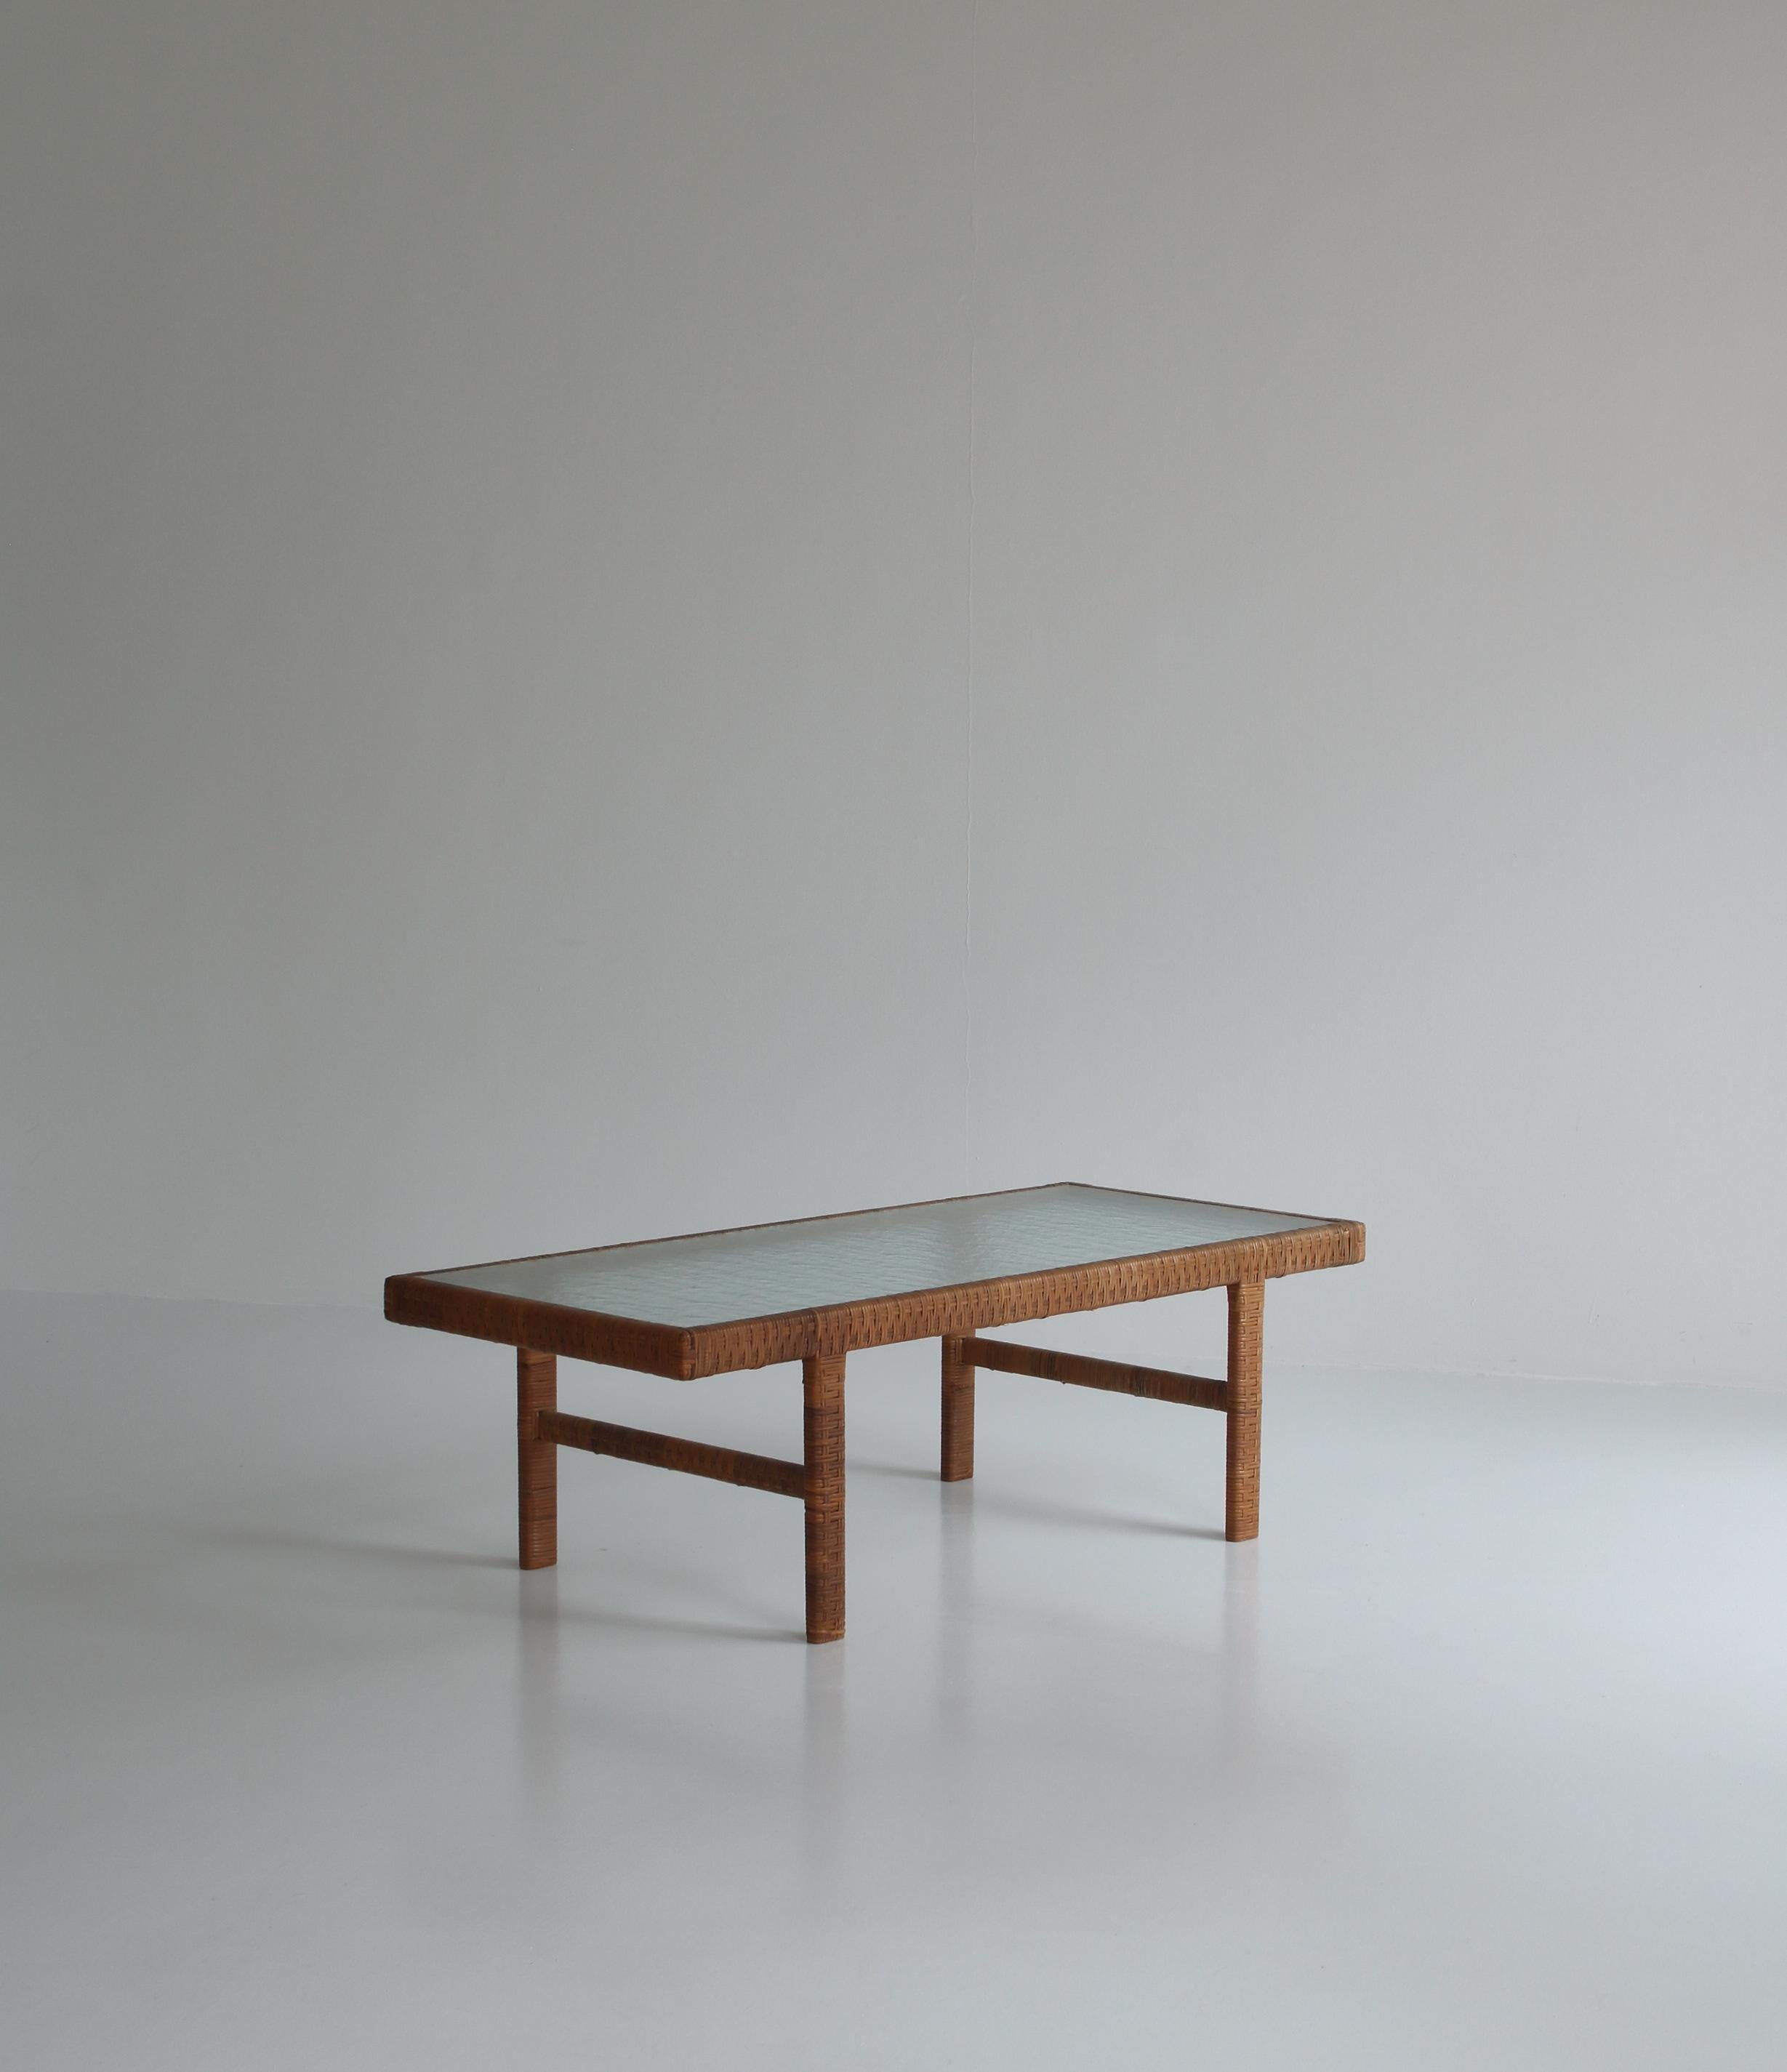 Danish Modern Coffee Table by R. Wengler in Rattan Cane and Matt Glass, 1940s For Sale 9